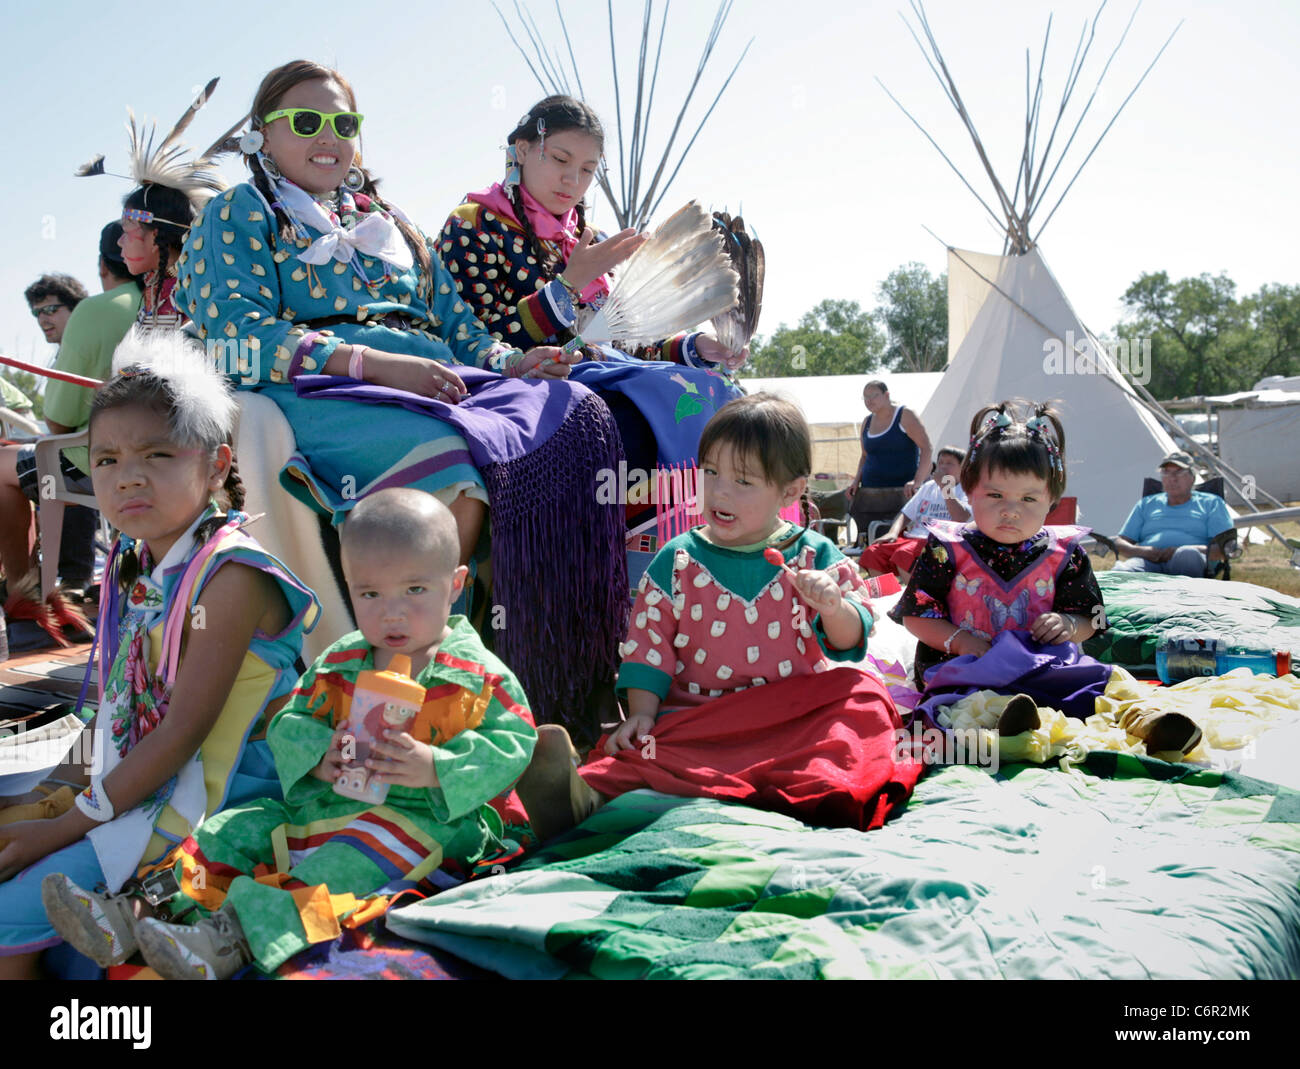 Children taking part in a Parade during the Crow Fair held annually at